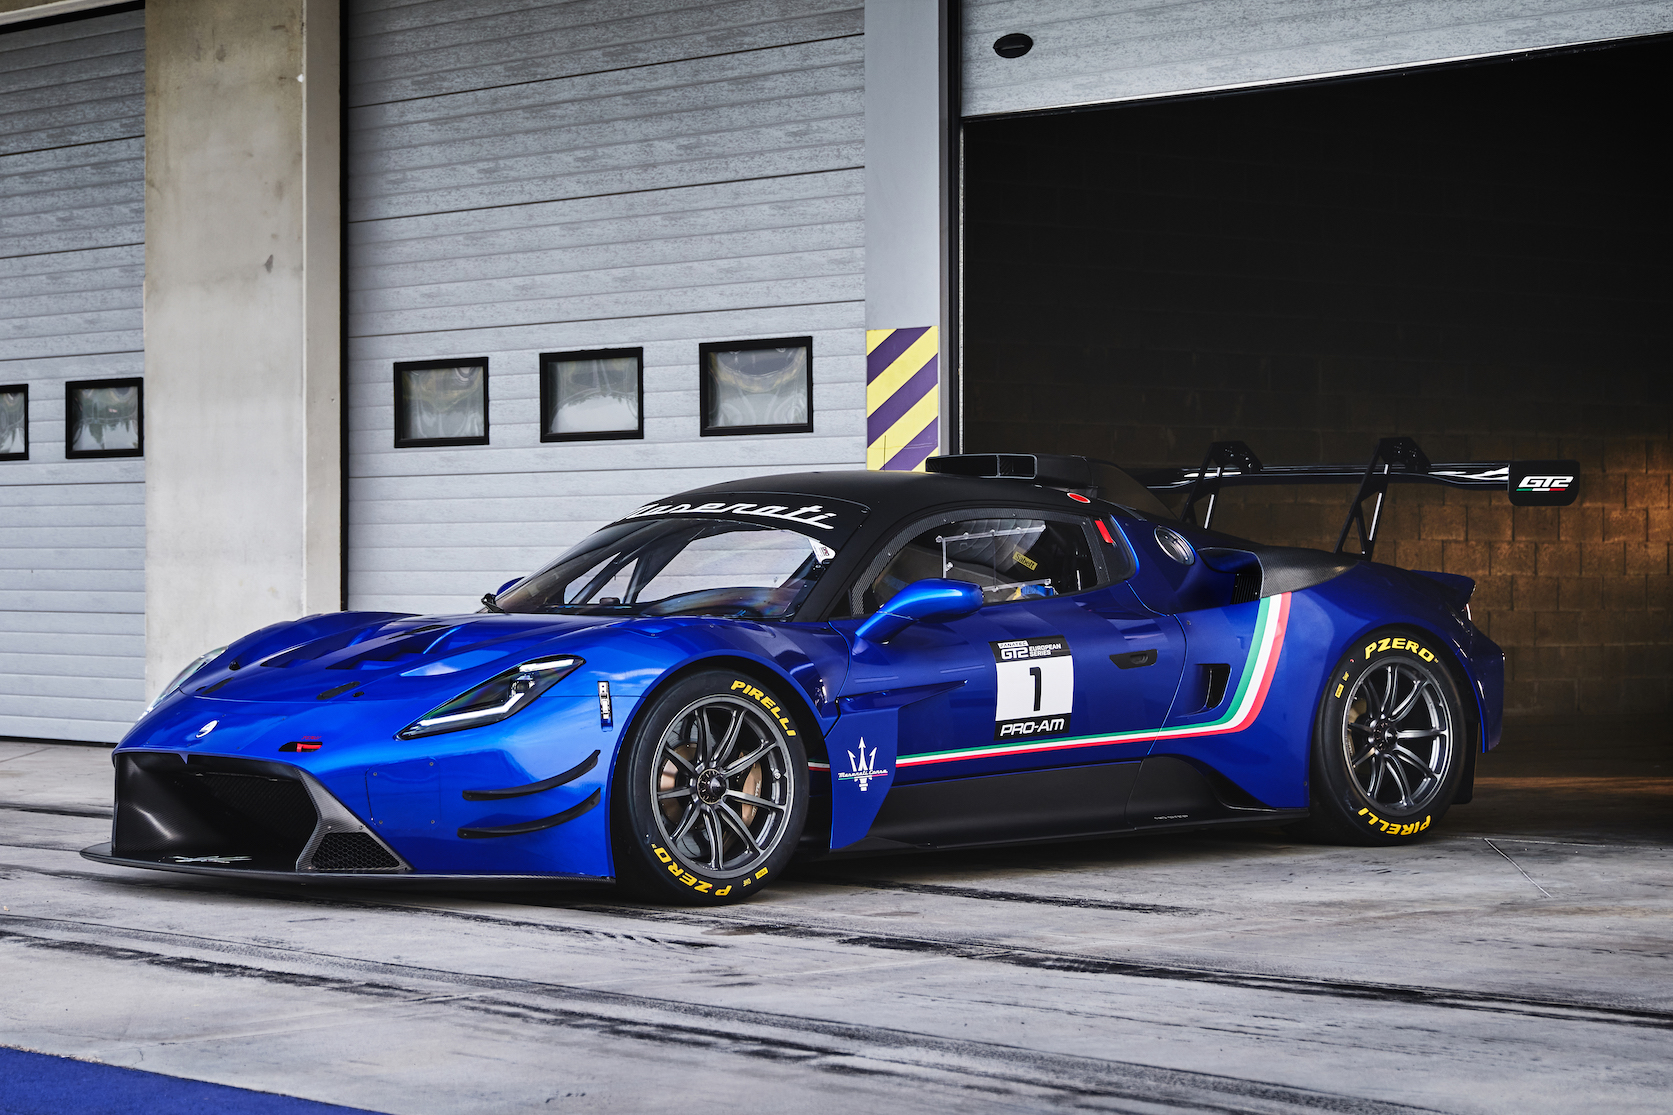 Maserati Returns to Track Racing with GT2 Racer, Set for European GT Series Debut